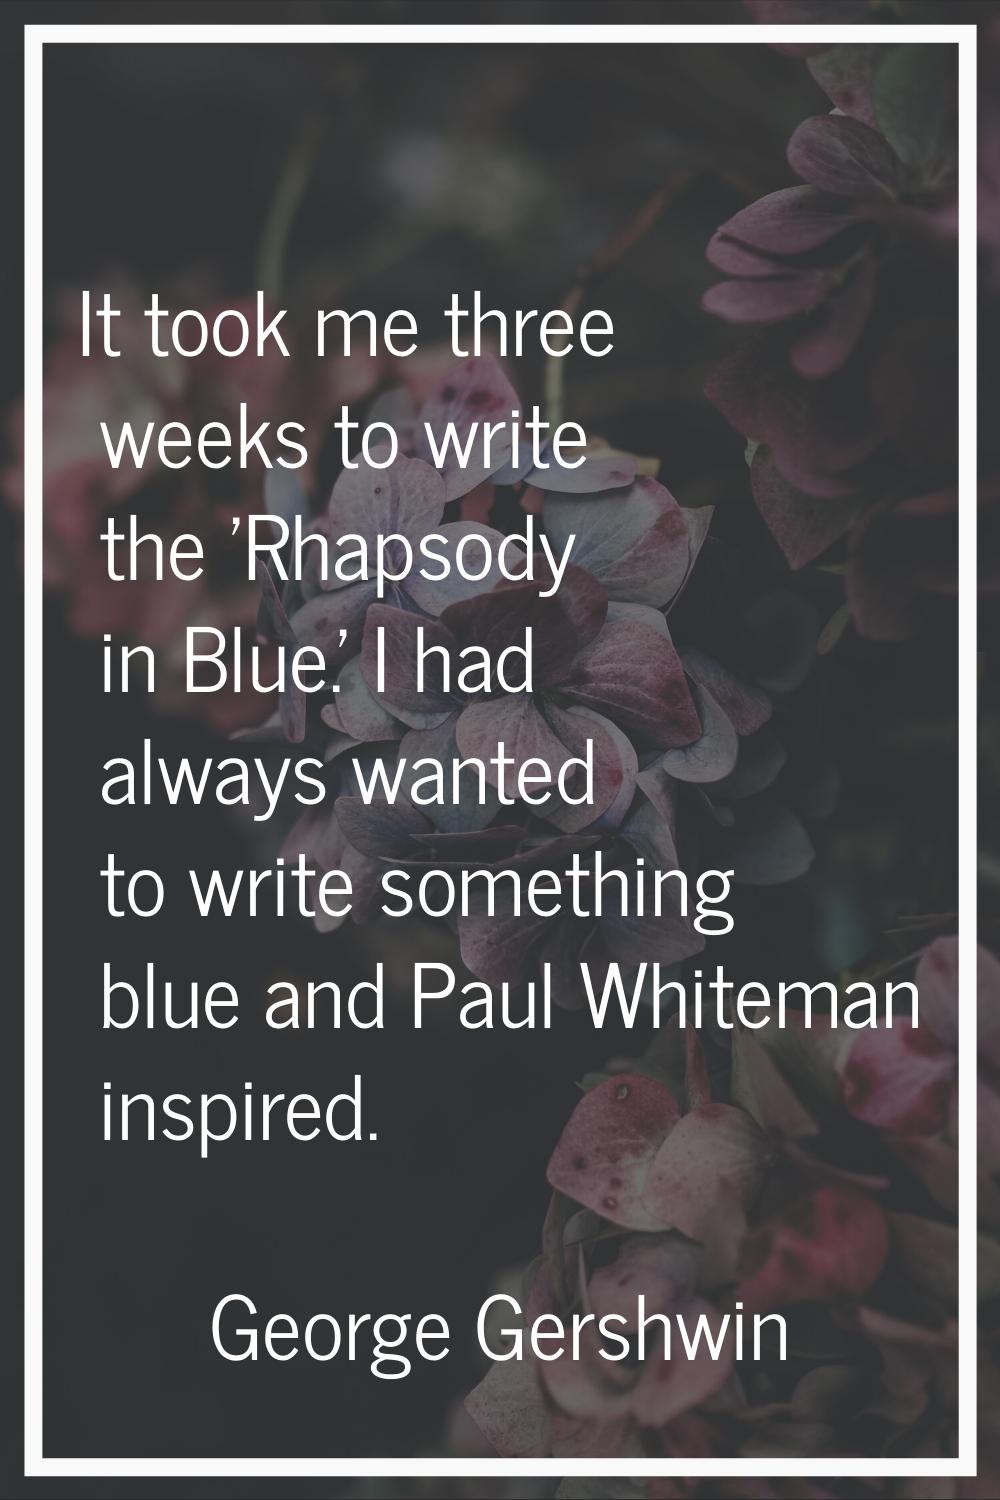 It took me three weeks to write the 'Rhapsody in Blue.' I had always wanted to write something blue